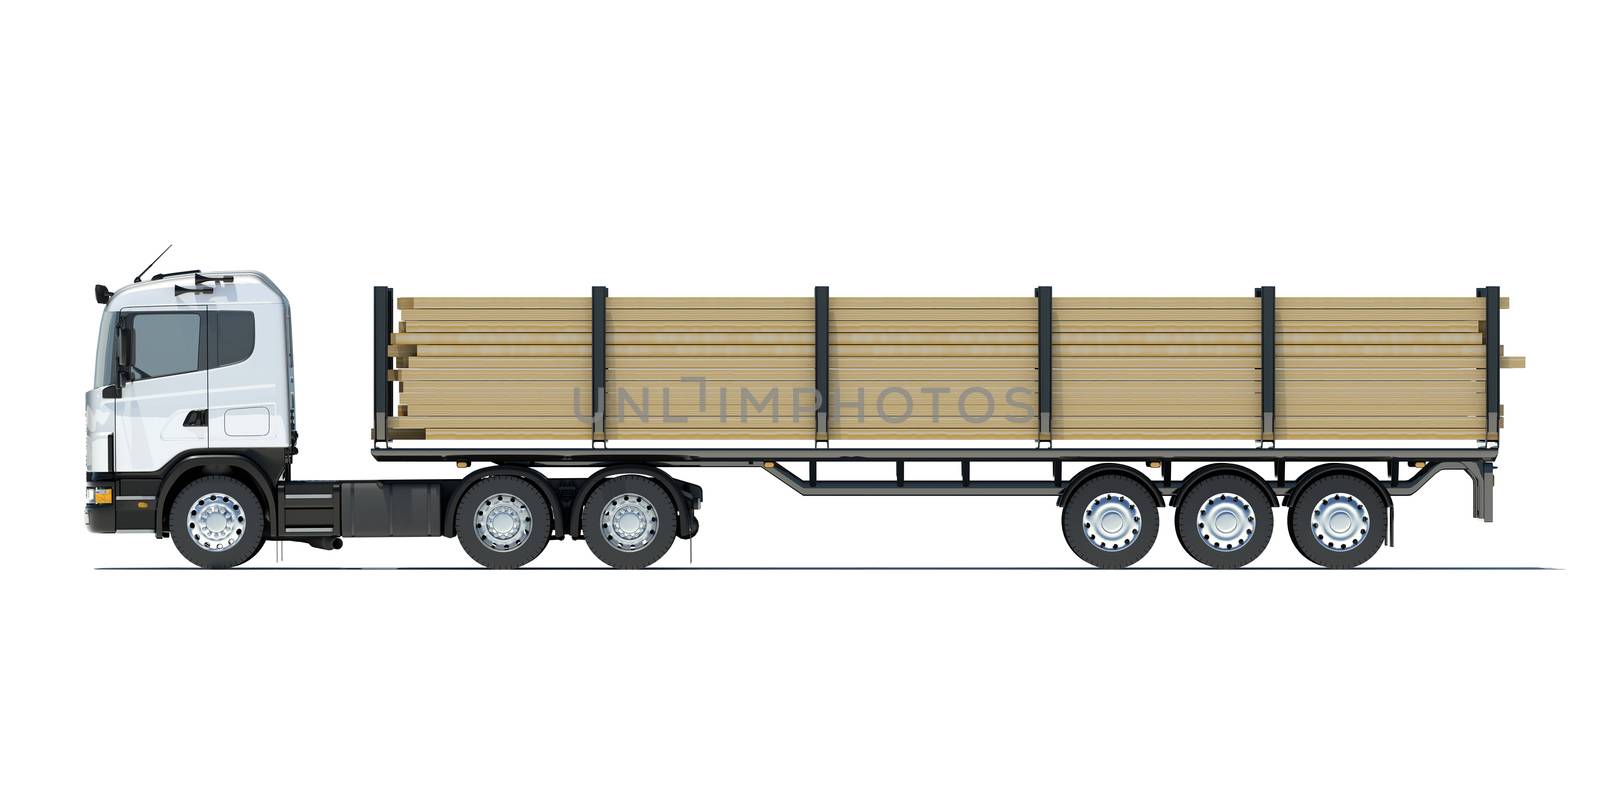 Truck transporting lumber. Isolated render on a white background